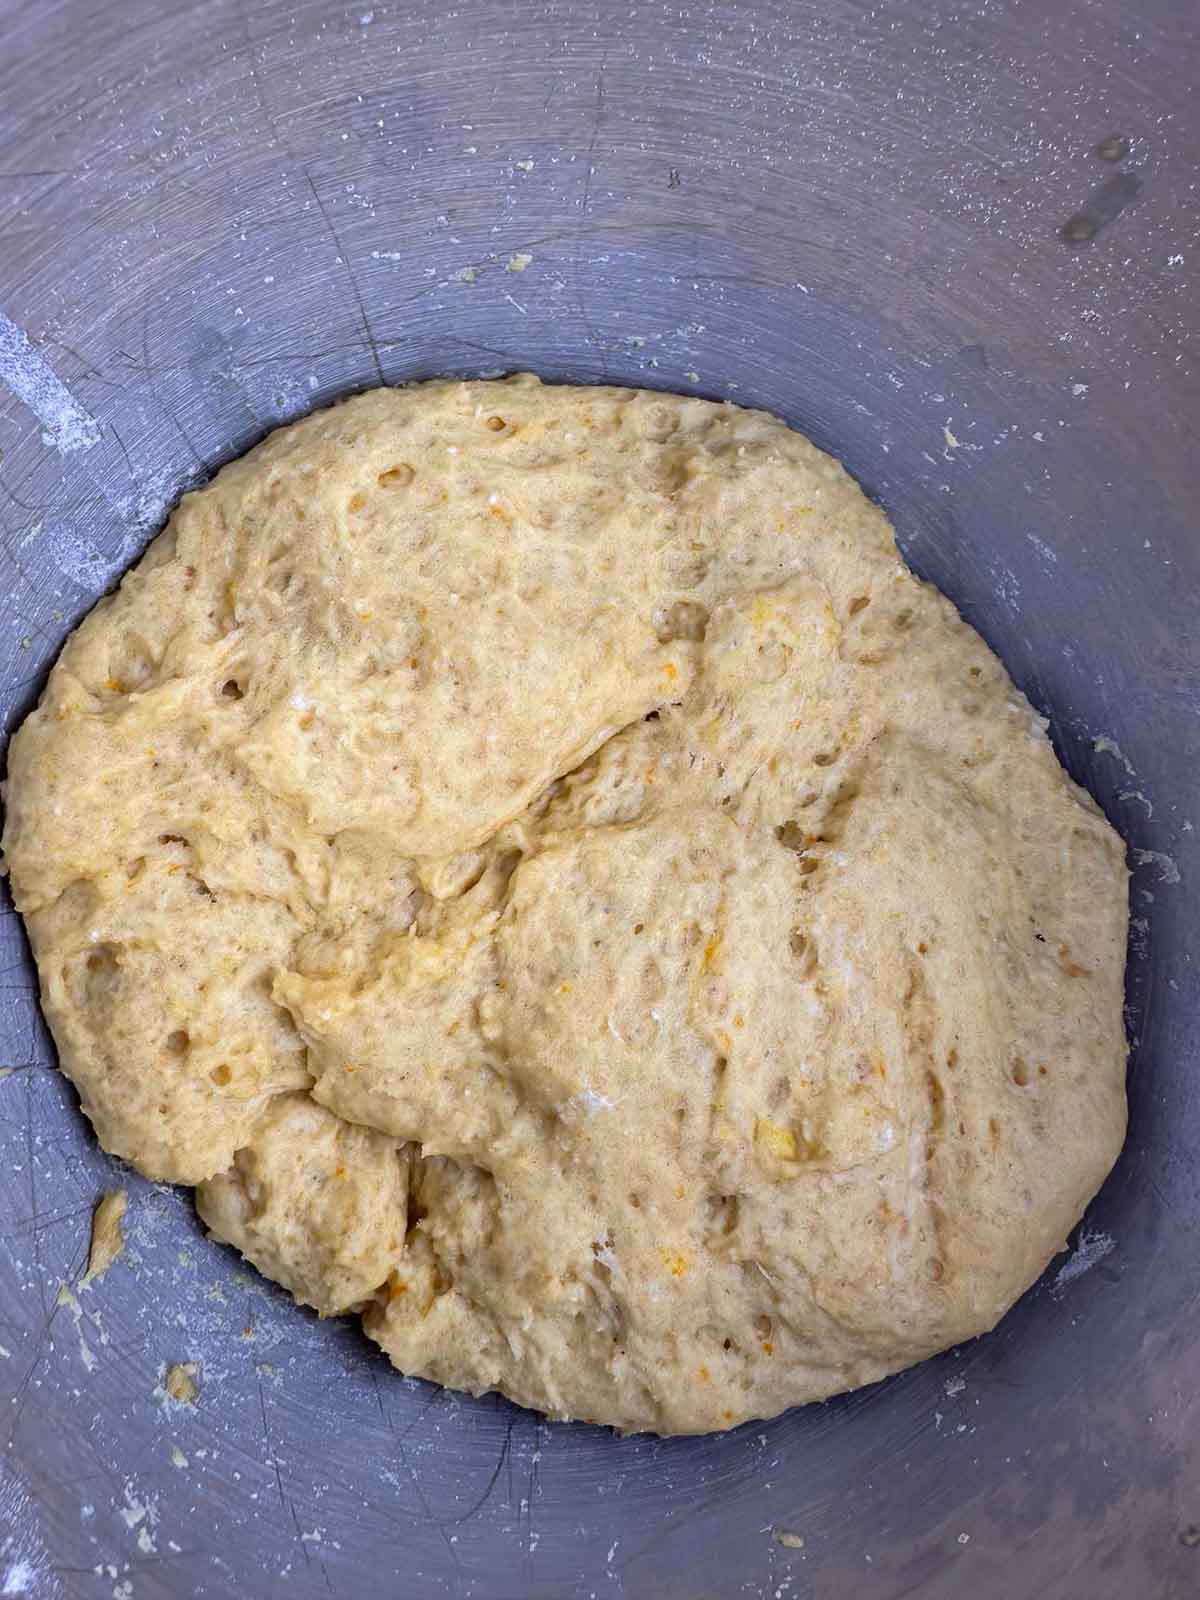 The Italian Easter bread dough after the first rise